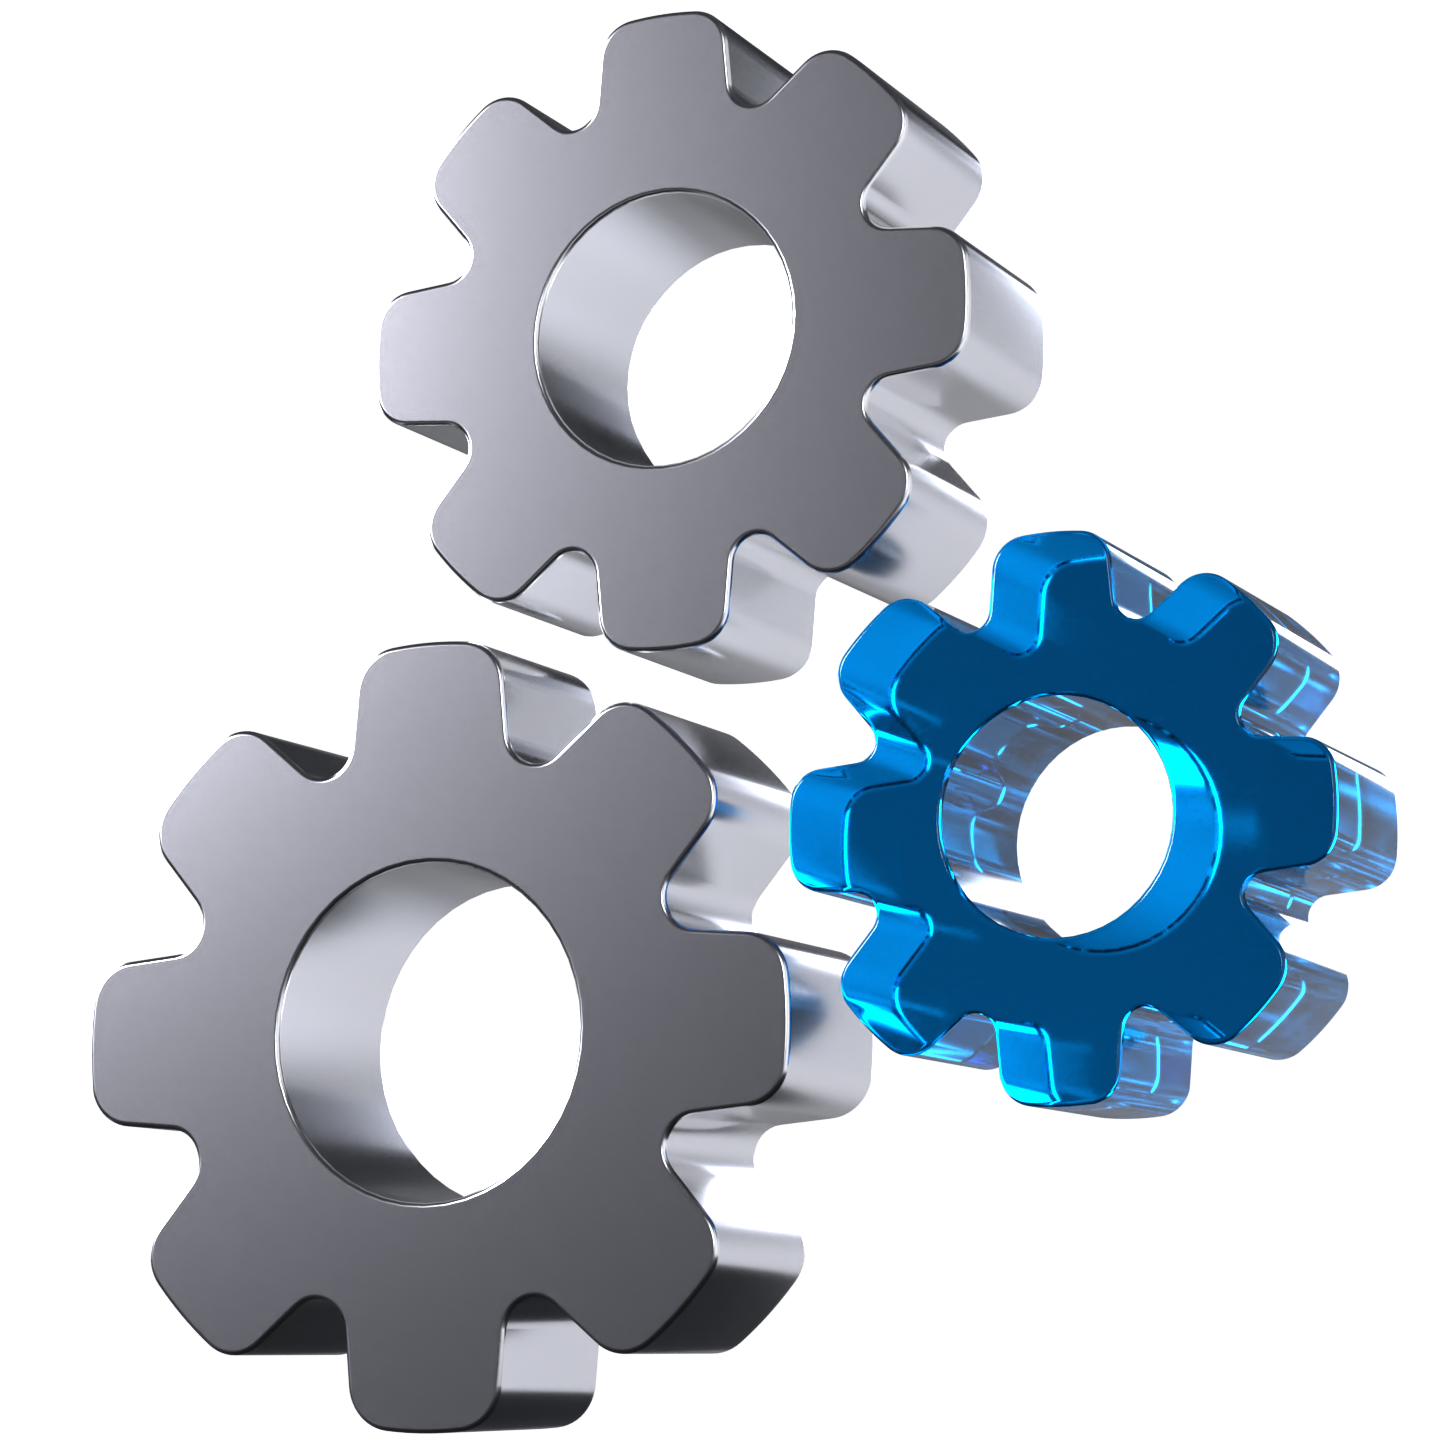 Three gears are stacked on top of each other one of which is blue